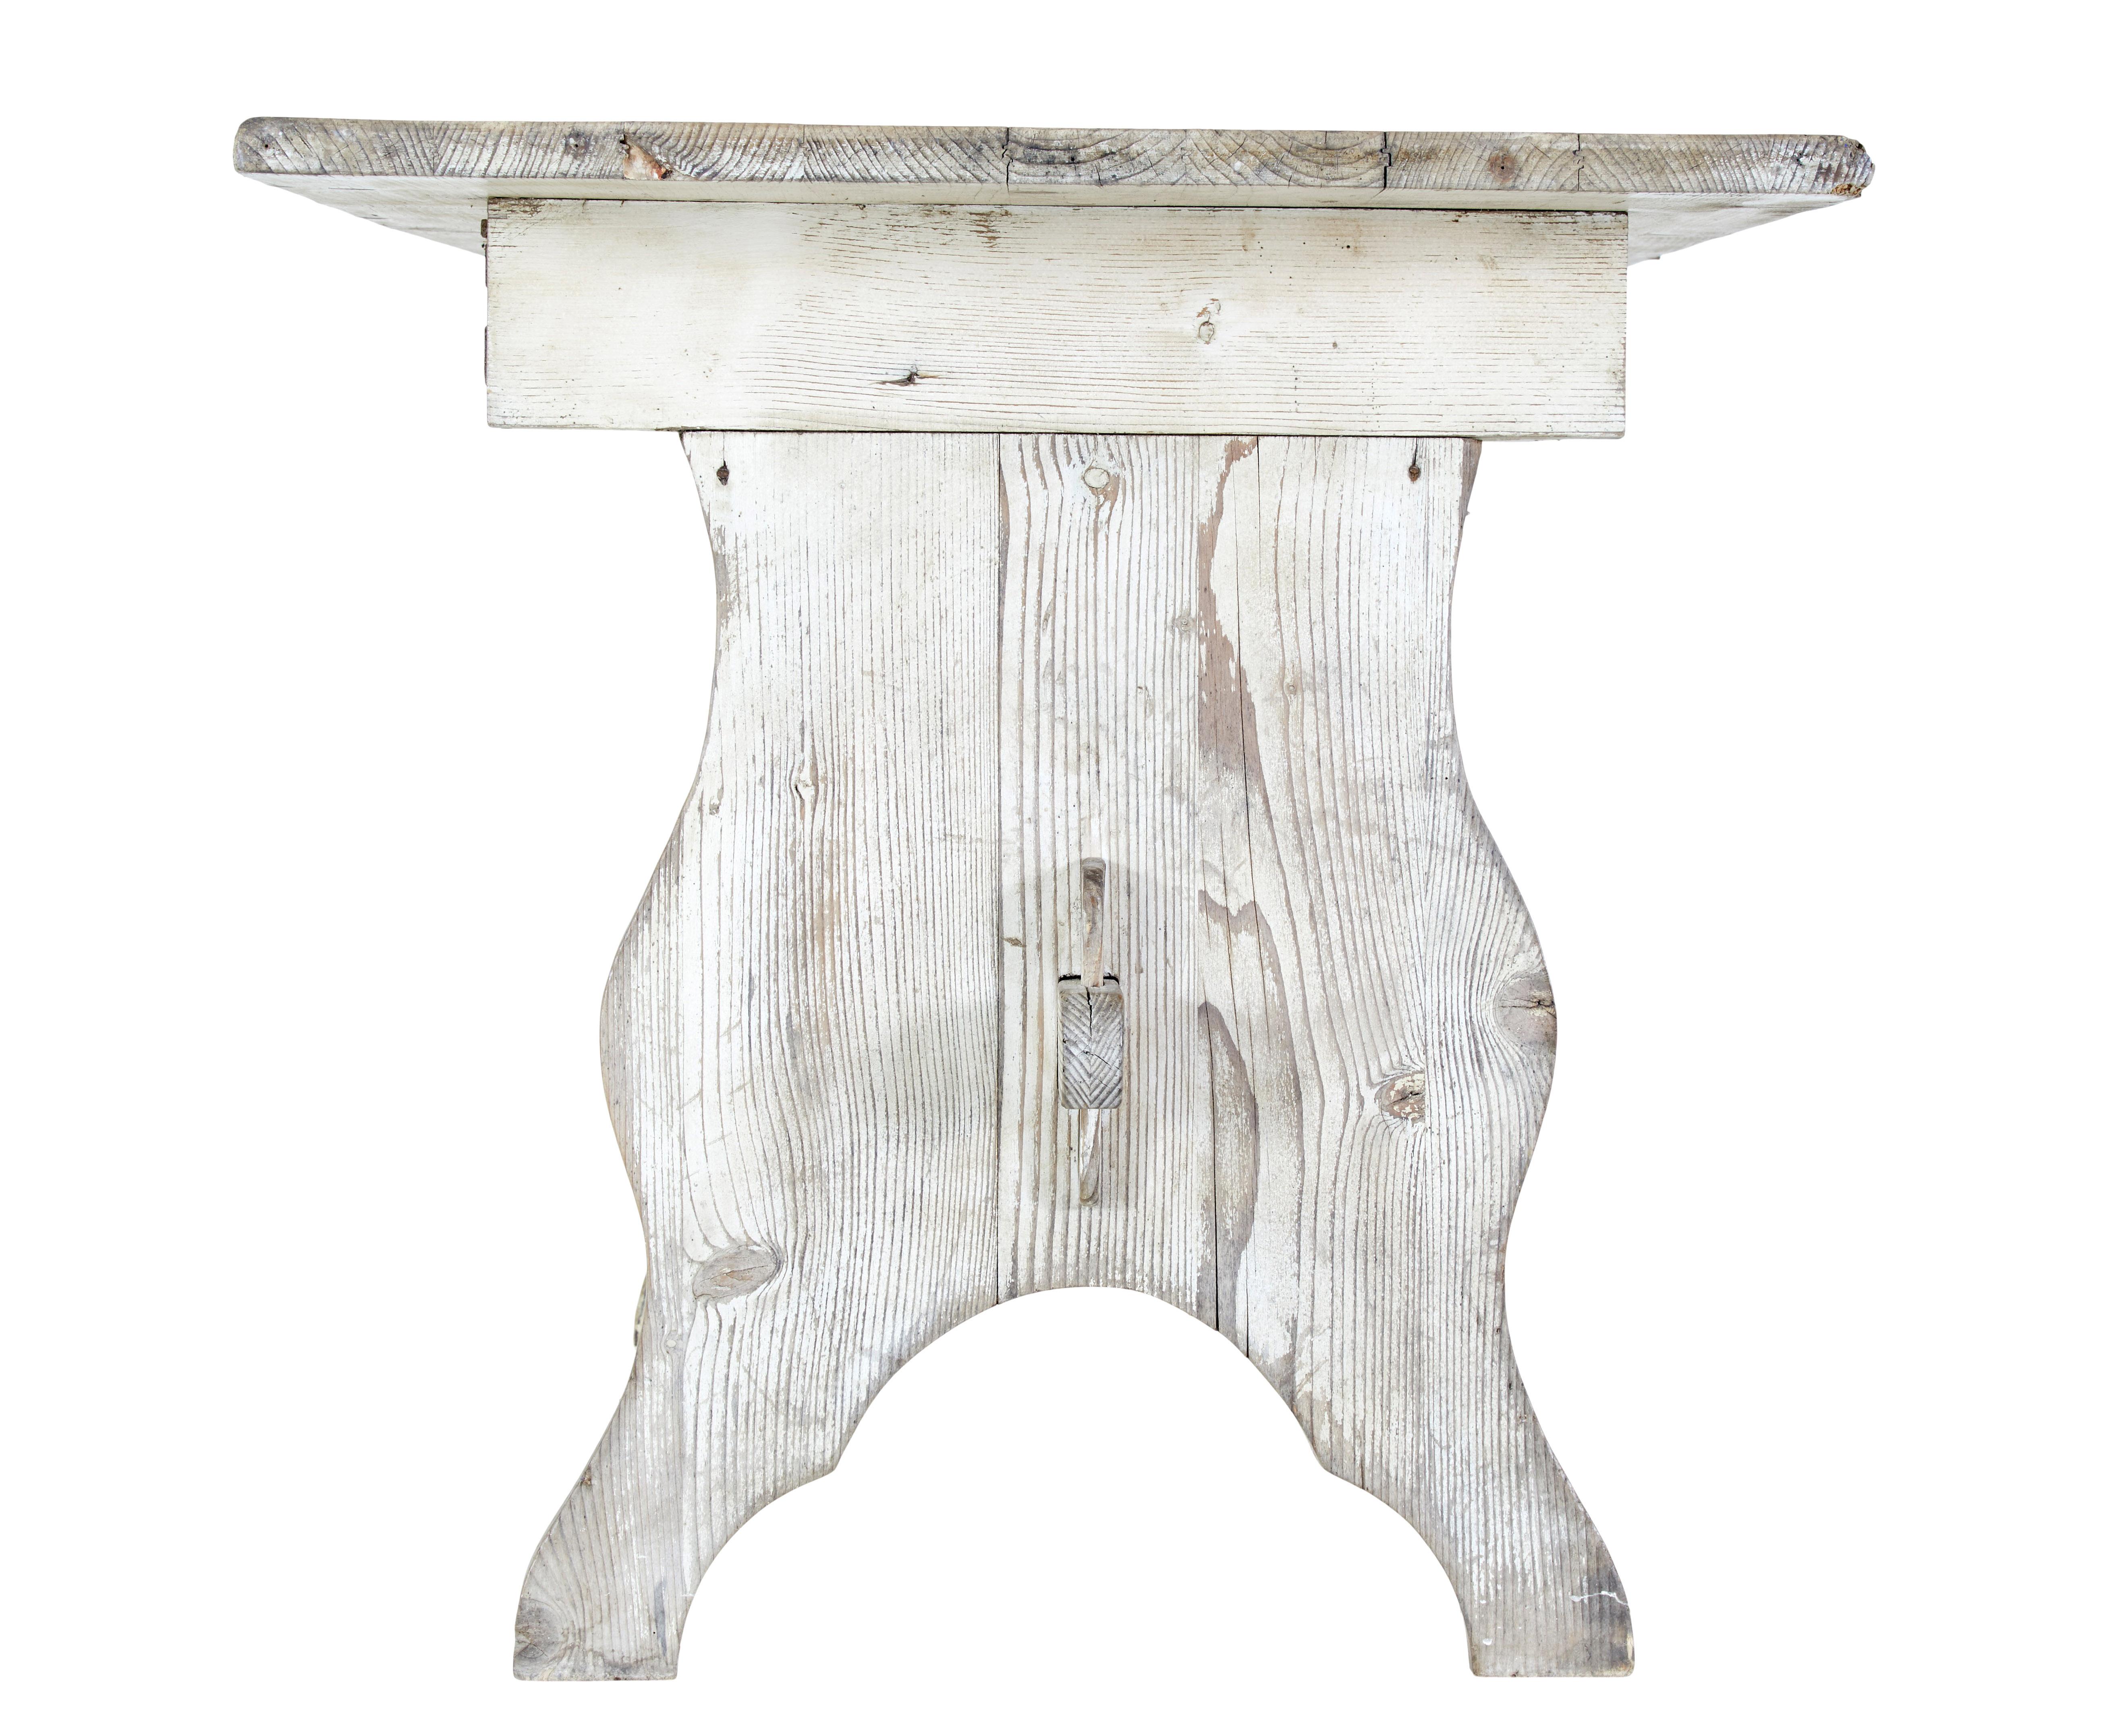 Hand-Crafted 19th Century Scandinavian Painted Pine Dining Table